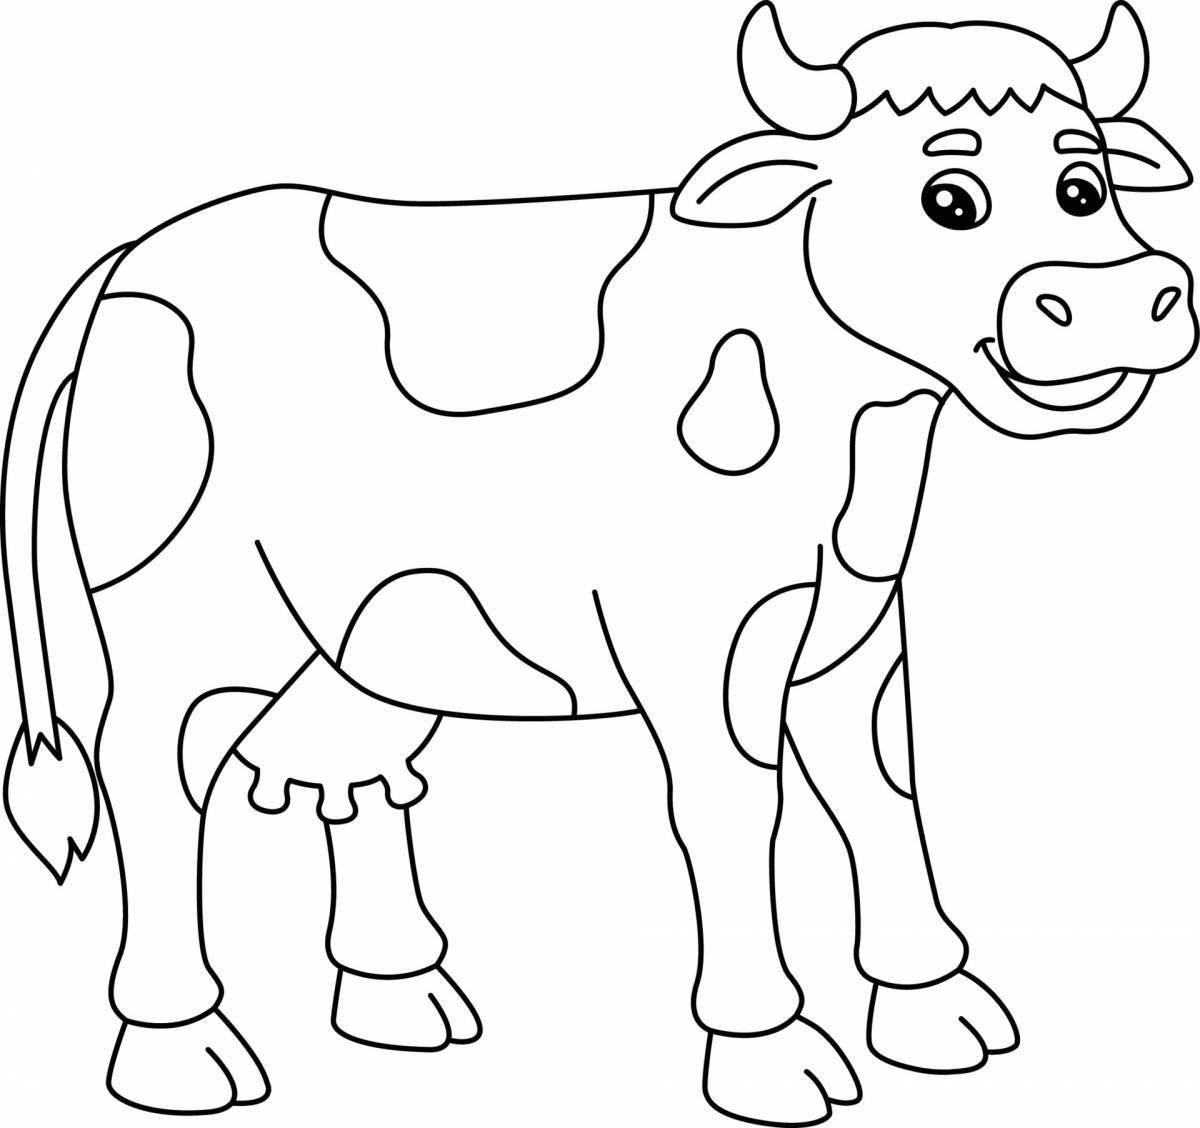 Majestic cow head coloring page